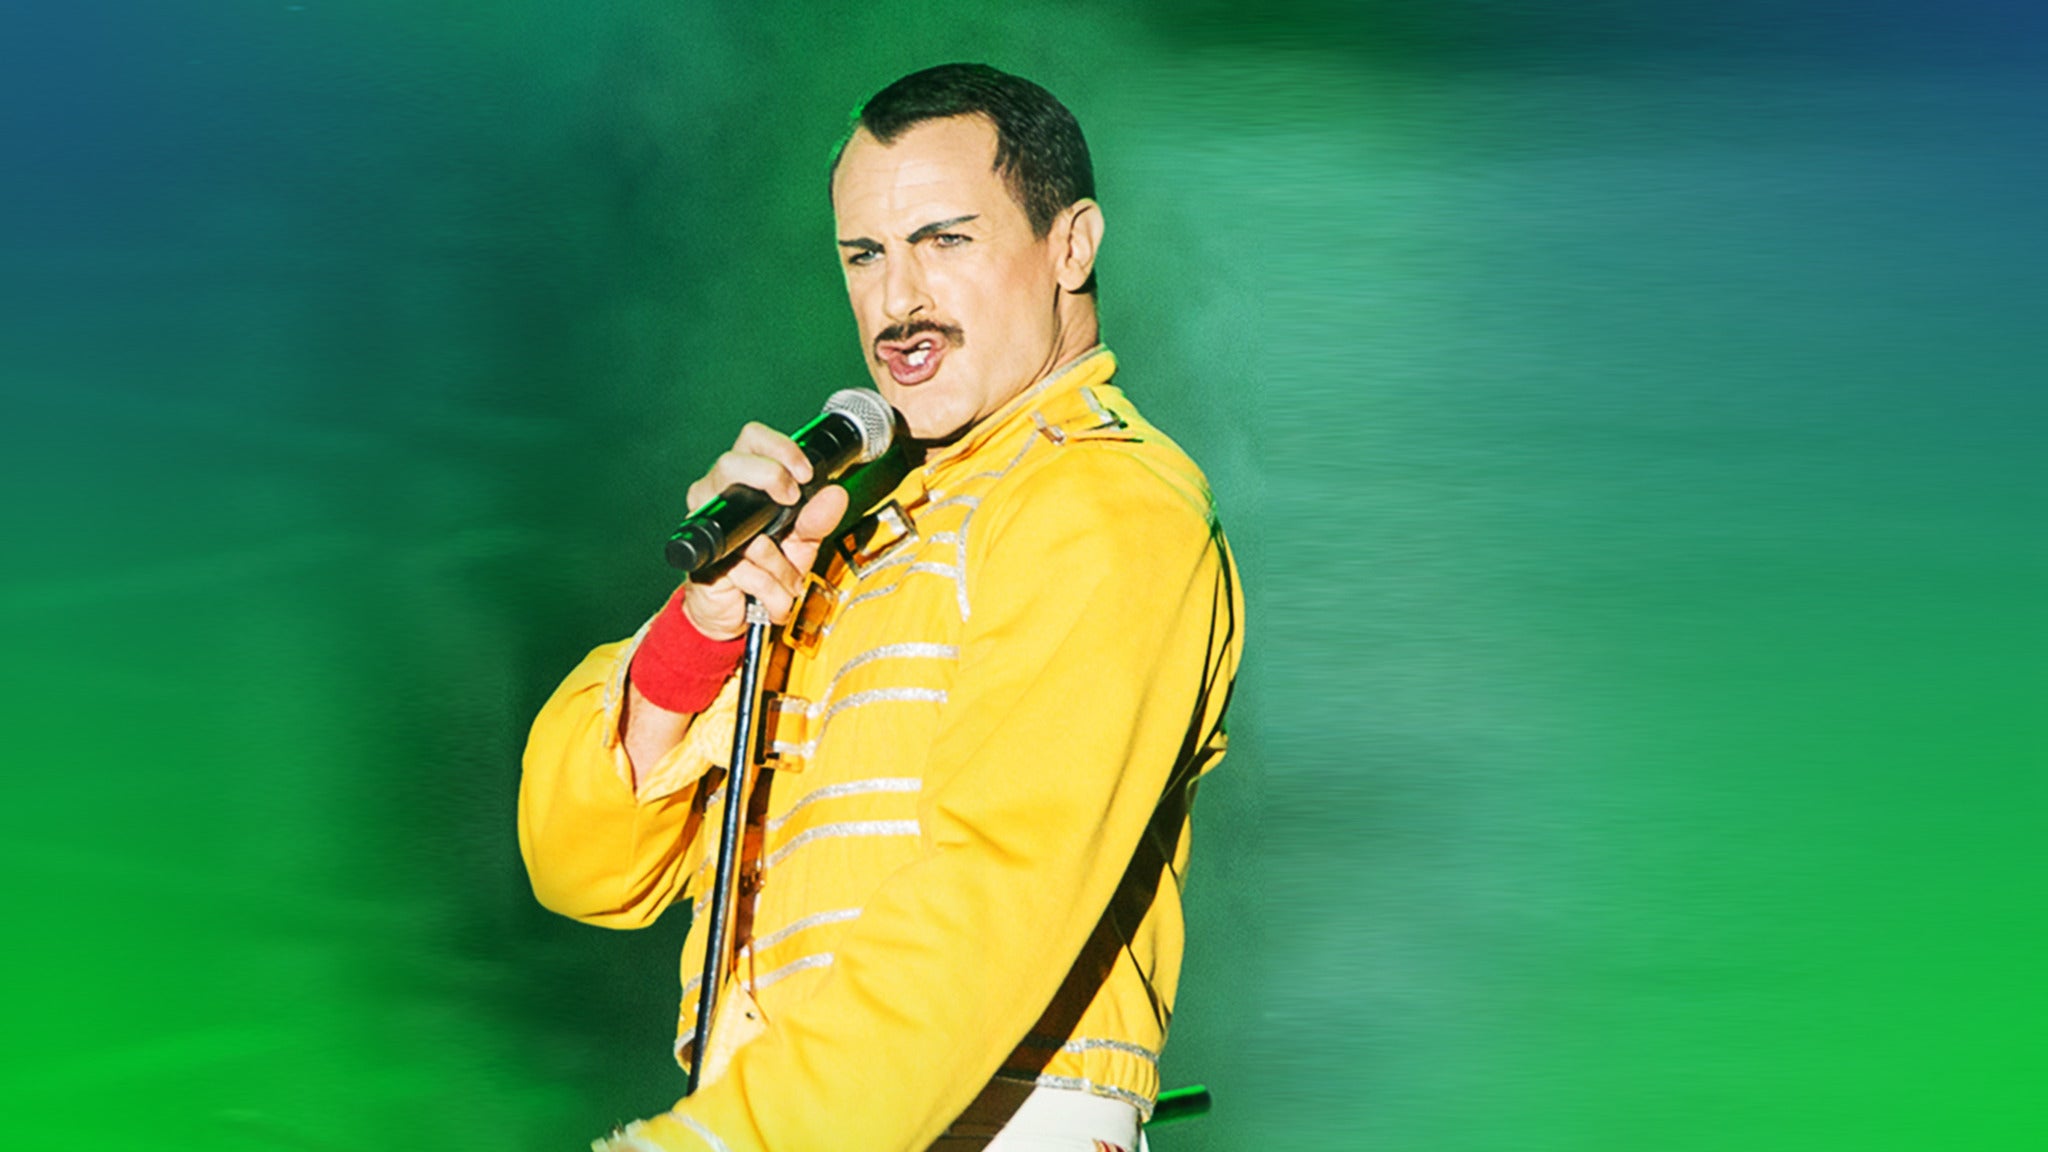 Image used with permission from Ticketmaster | Queen Its a Kinda Magic tickets